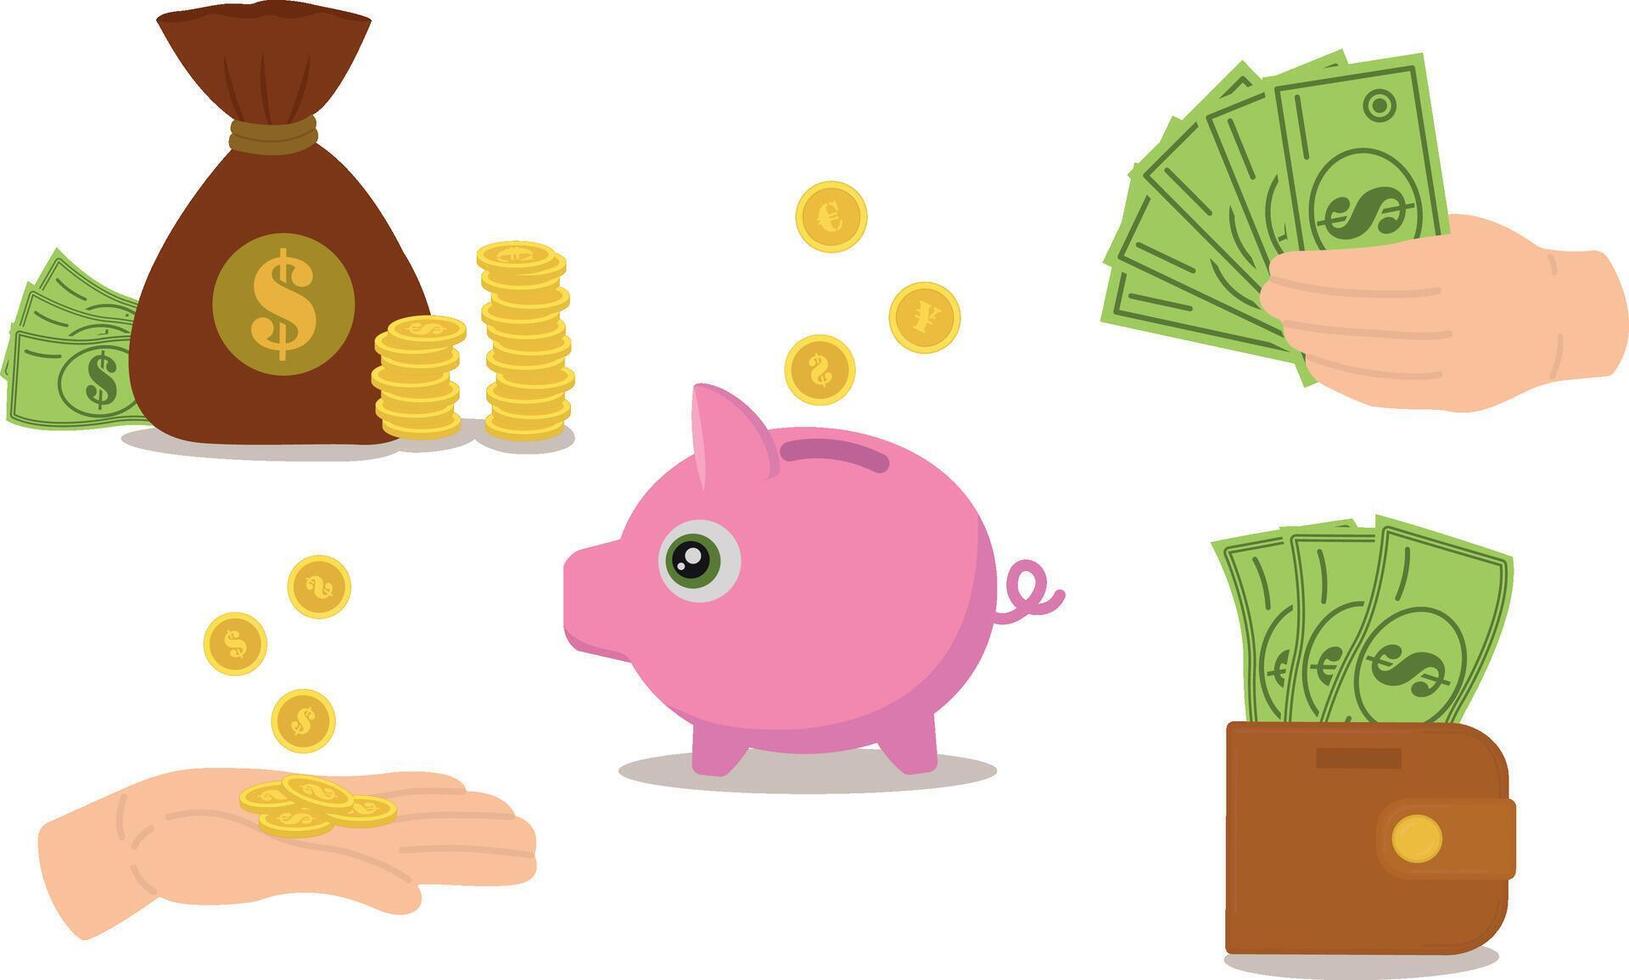 A set of vector illustrations, coins, bills, a purse with dollar bills, a hand with money, a piggy bank and a bag of money, cash savings. Business illustration.